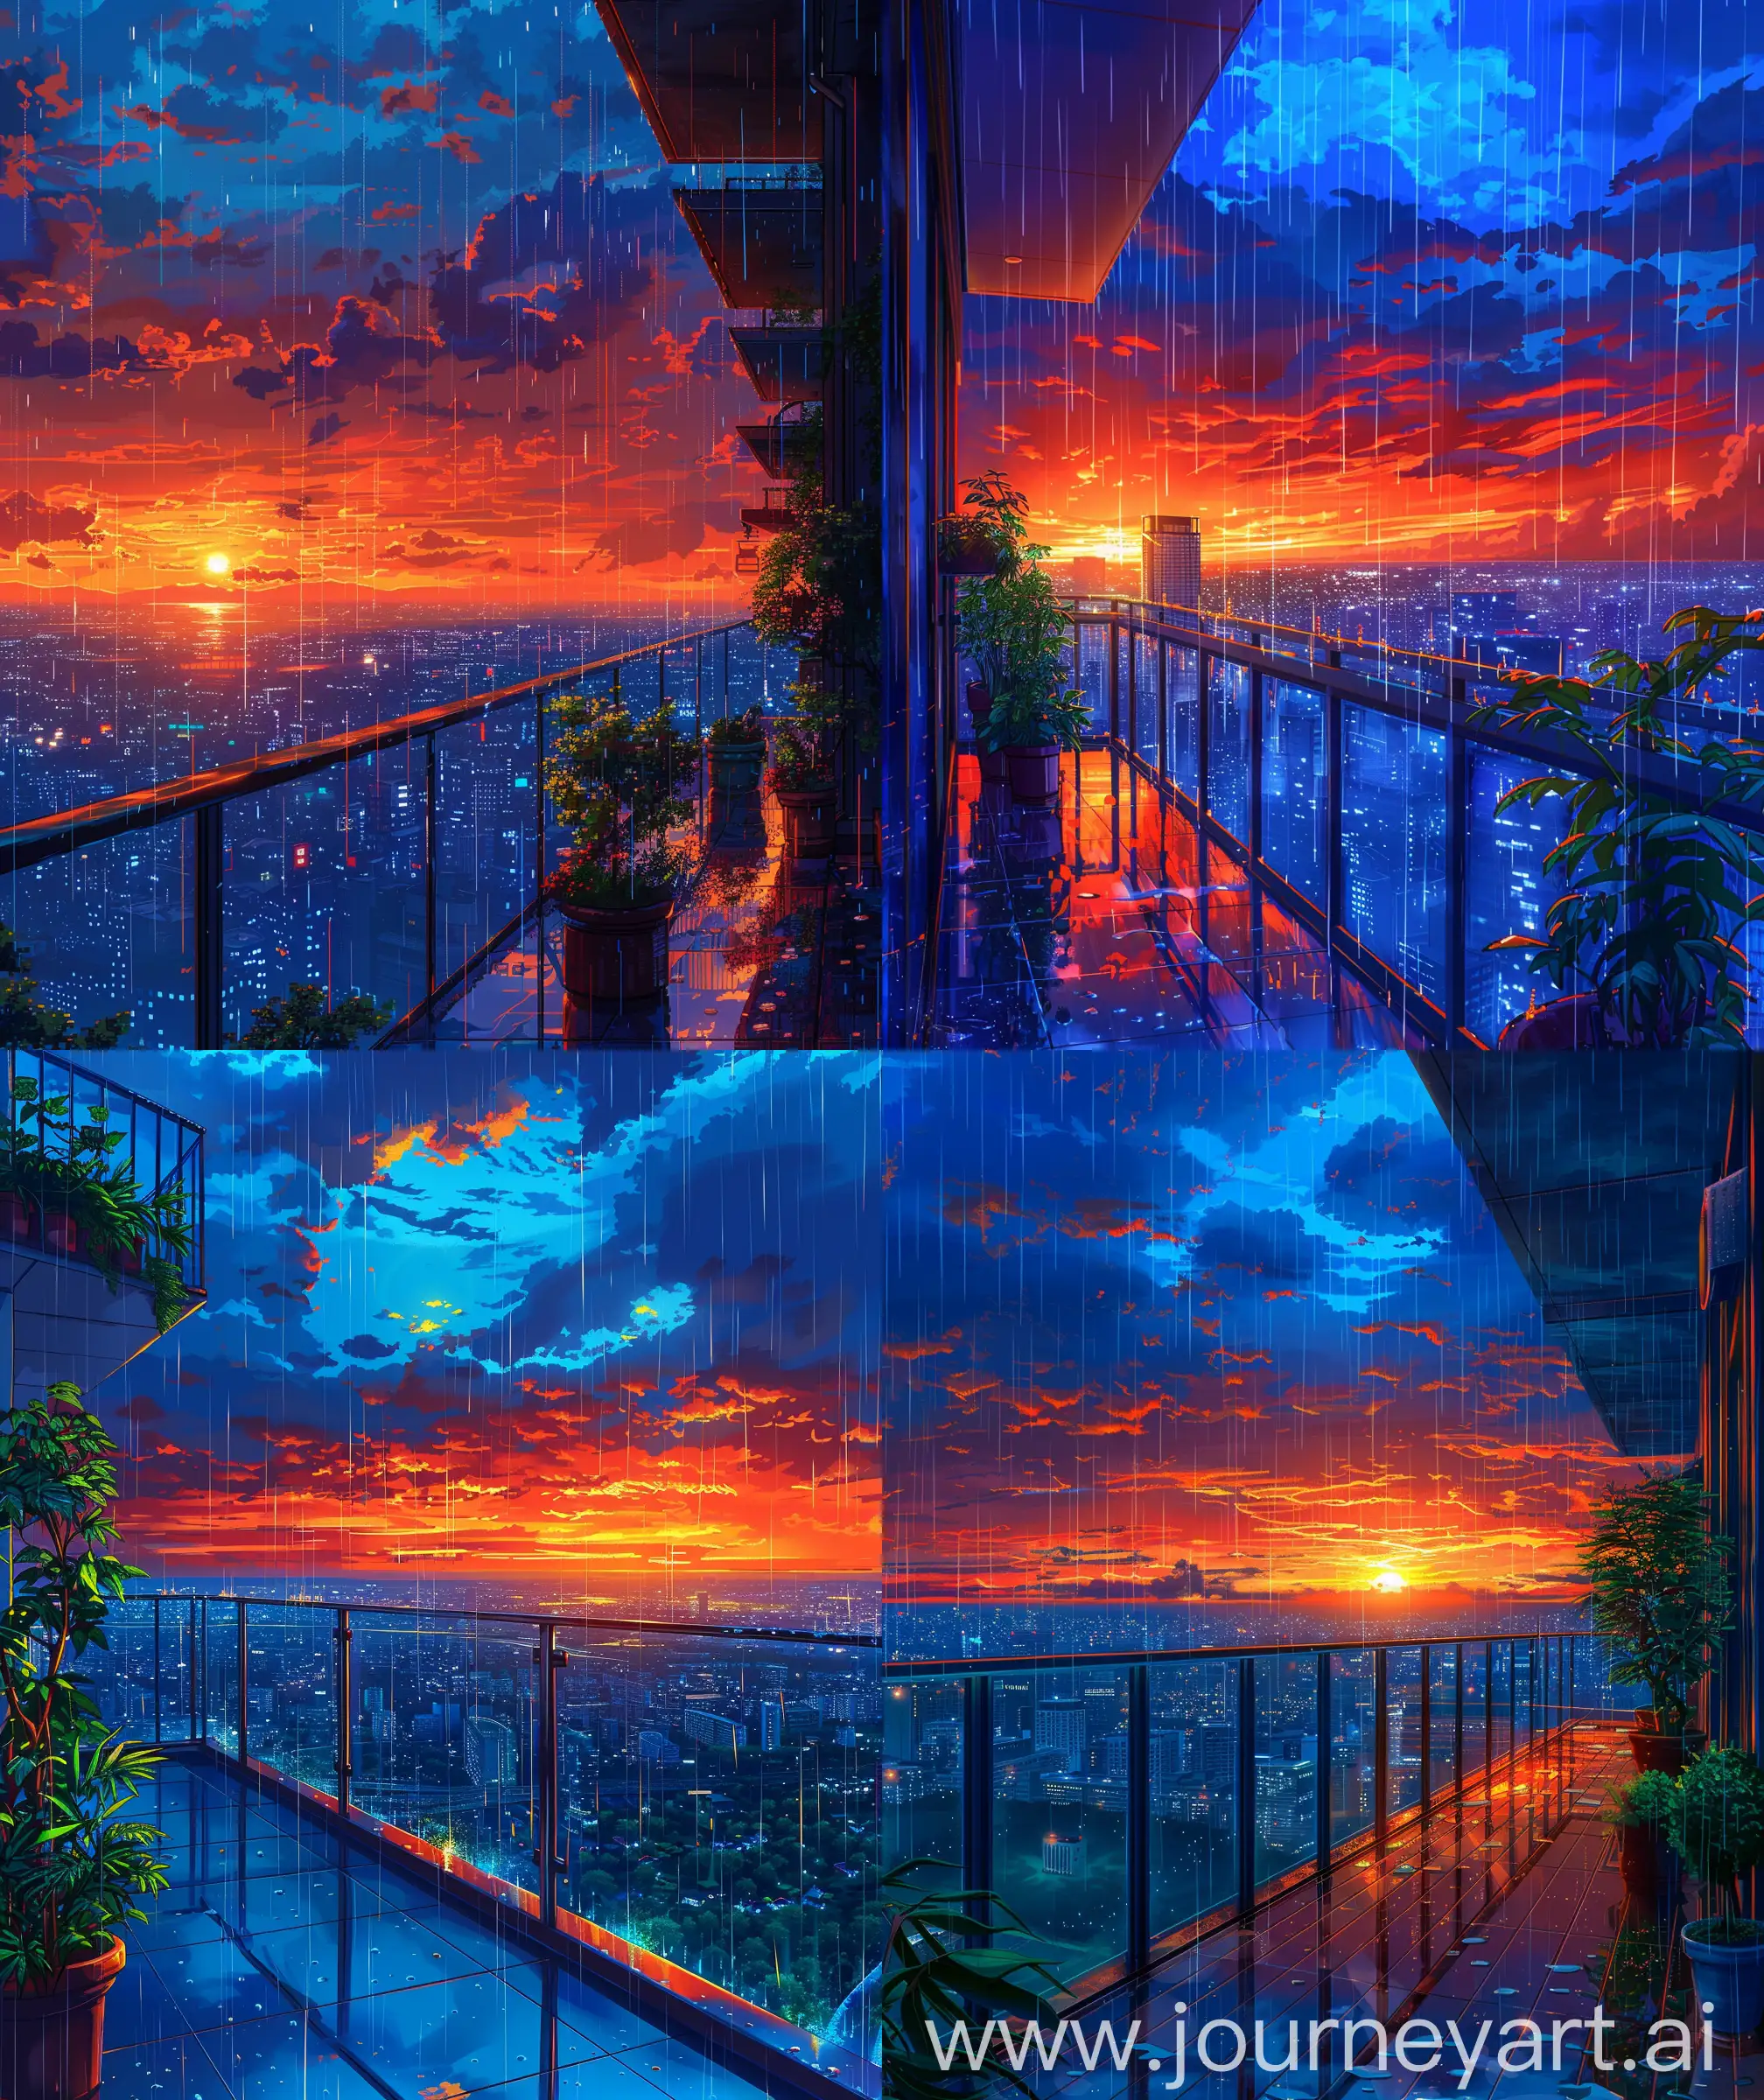 Anime-Cityscape-Sunset-in-Pixel-Art-Vibrant-Sky-and-Rain-from-High-Rise-Balcony